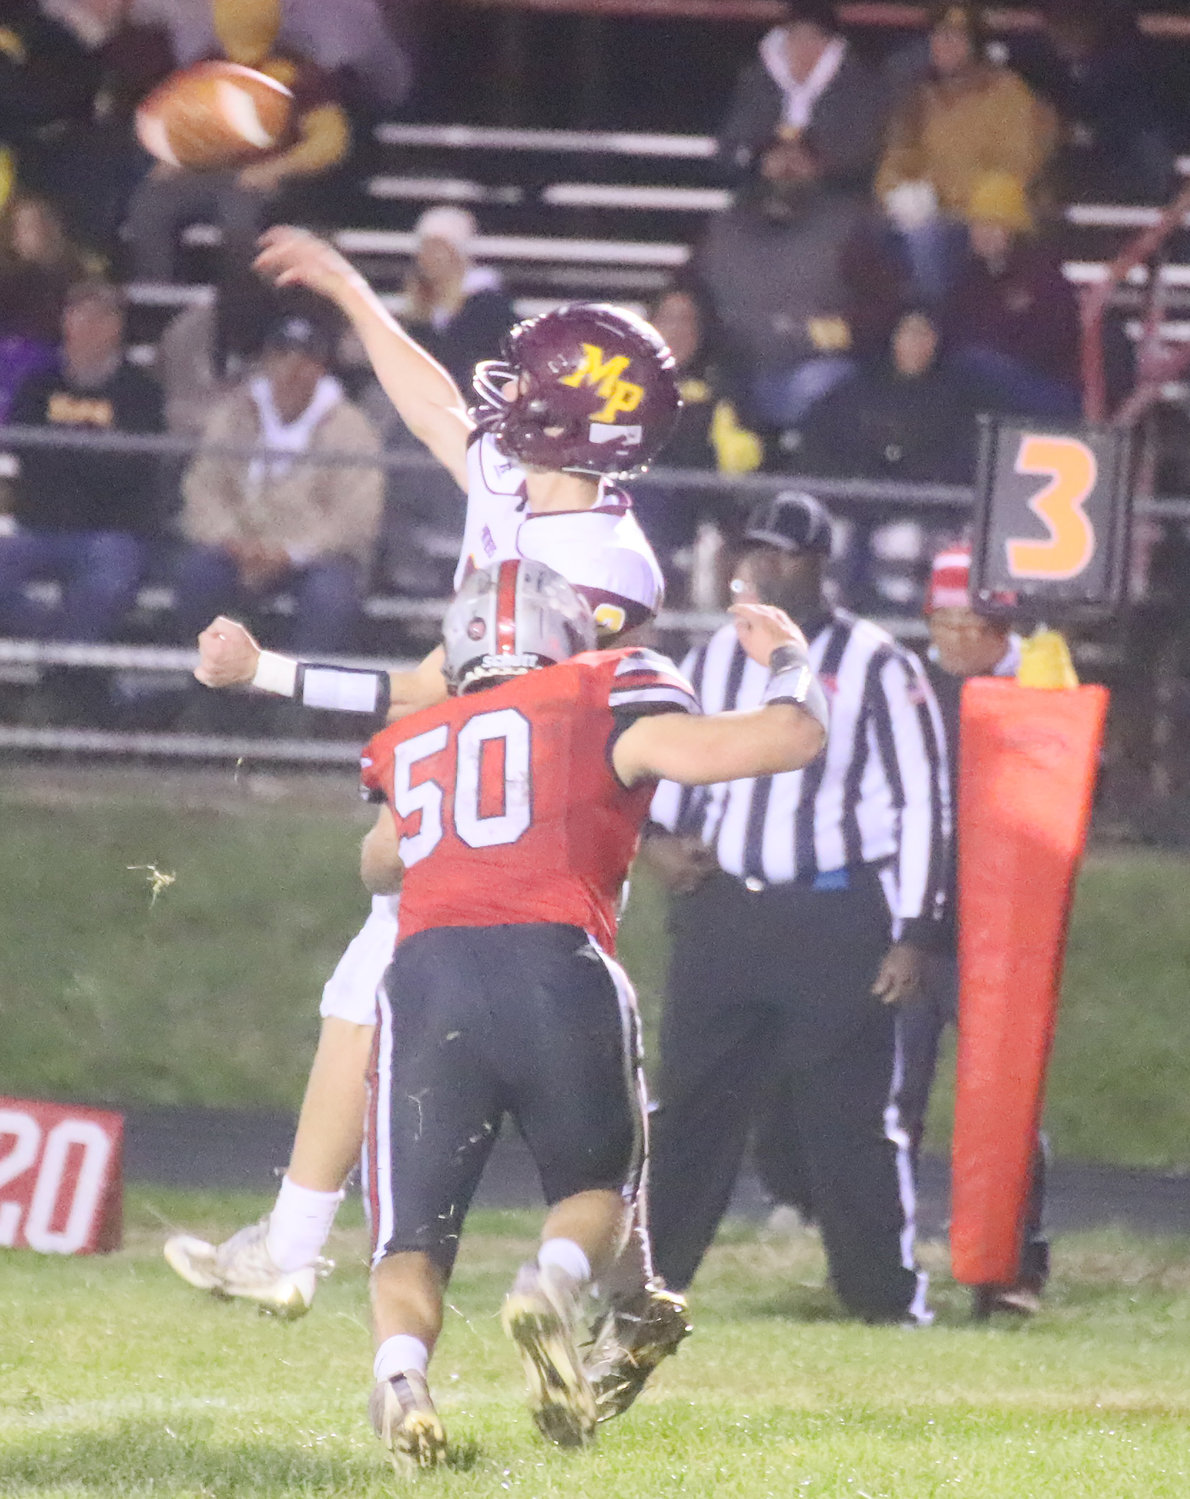 Ike Thacher, art of the Hounds defensive T-N-T threat on the defensive line, gets pressure on Richtman in the second half Friday night